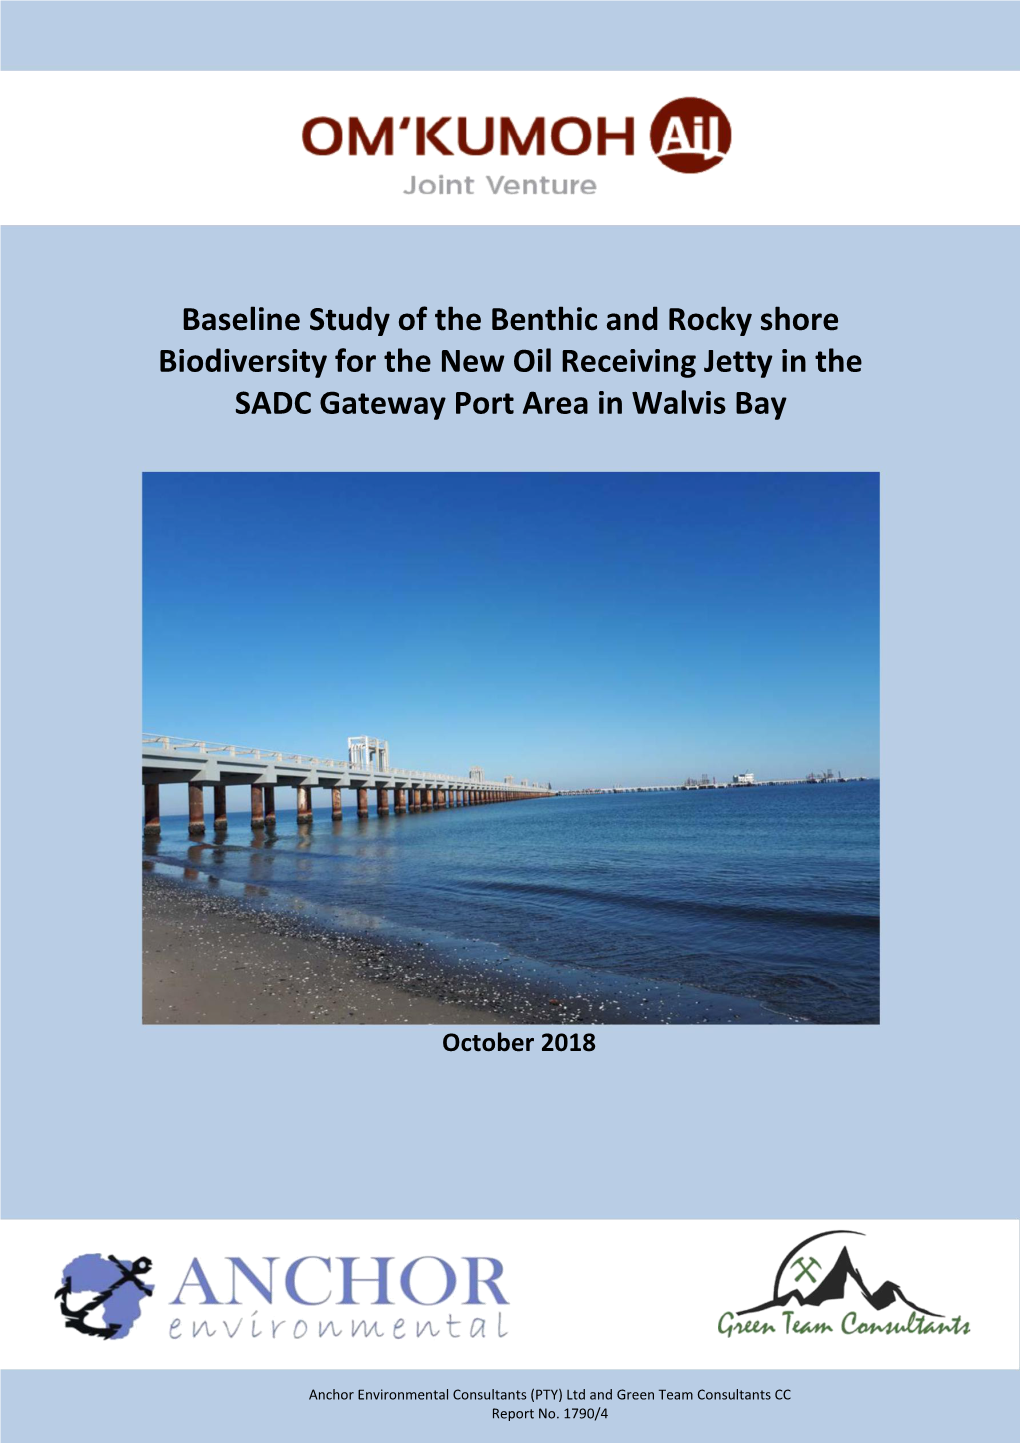 Baseline Study of the Benthic and Rocky Shore Biodiversity for the New Oil Receiving Jetty in the SADC Gateway Port Area in Walvis Bay